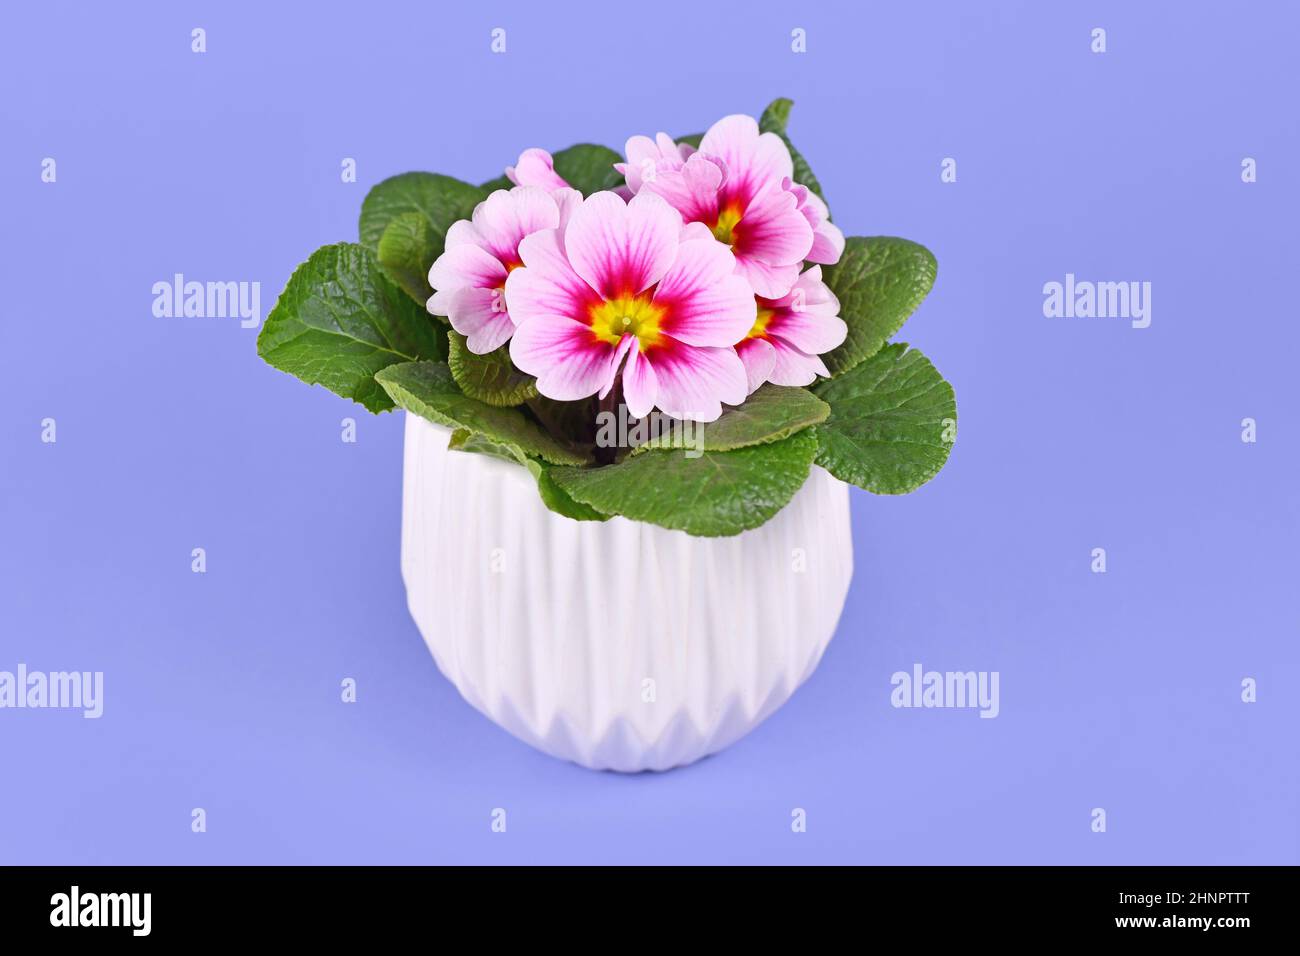 Potted pink 'Primula Acaulis' primrose flowers in bloom on violet background Stock Photo